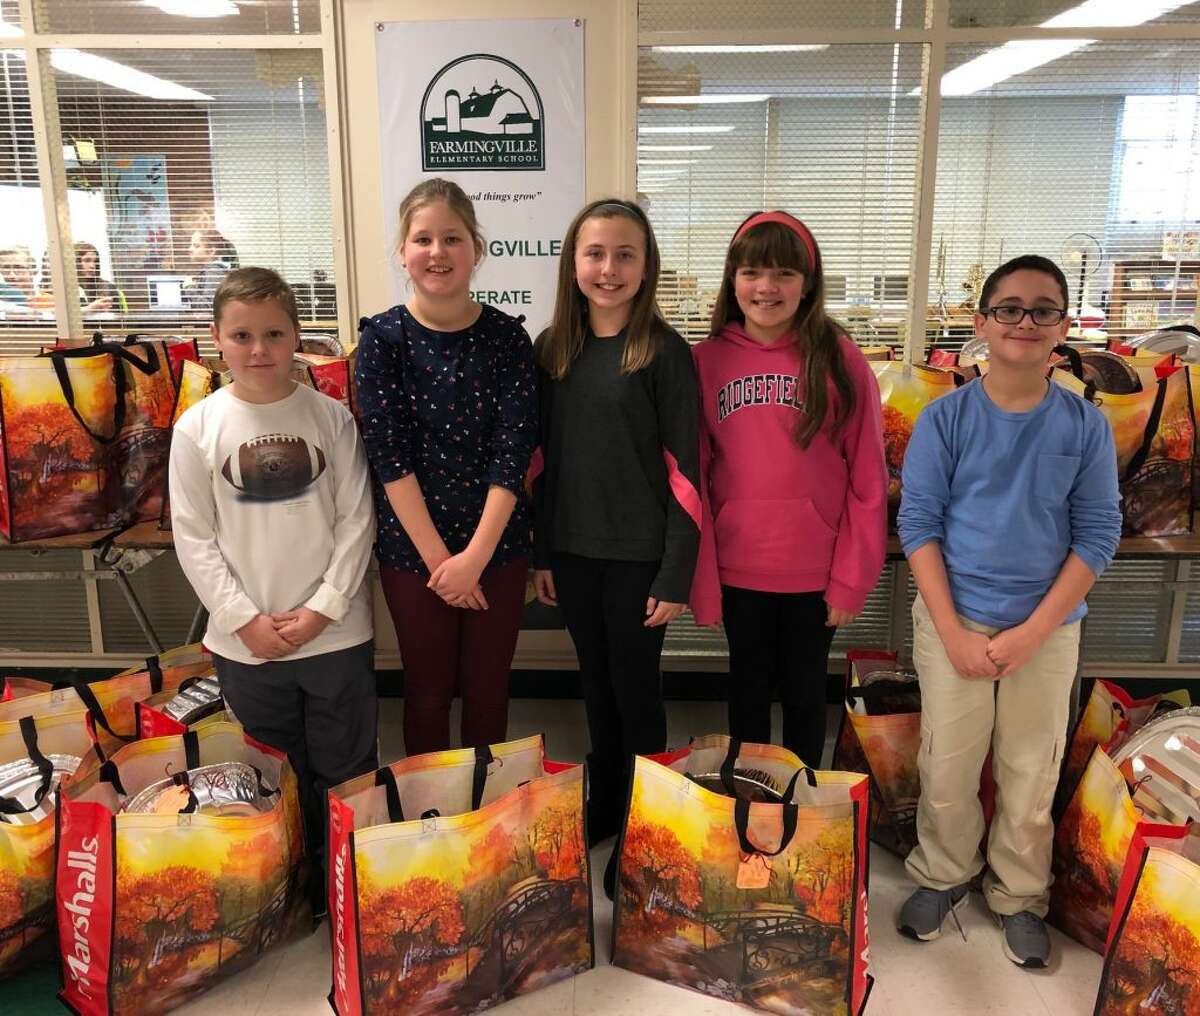 The Farmingville Elementary School community collected and delivered 28 Thanksgiving baskets to the Women's Center of Greater Danbury. Each basket contained a full Thanksgiving feast, including a gift card to purchase a turkey. Since the program started, Farmingville has donated over 150 meals to the Women's Center. Pictured from left to right: Brady Grijns, Lotte Groot, Kylie Lassow, Brenna Williams and Shesh Sheridan.